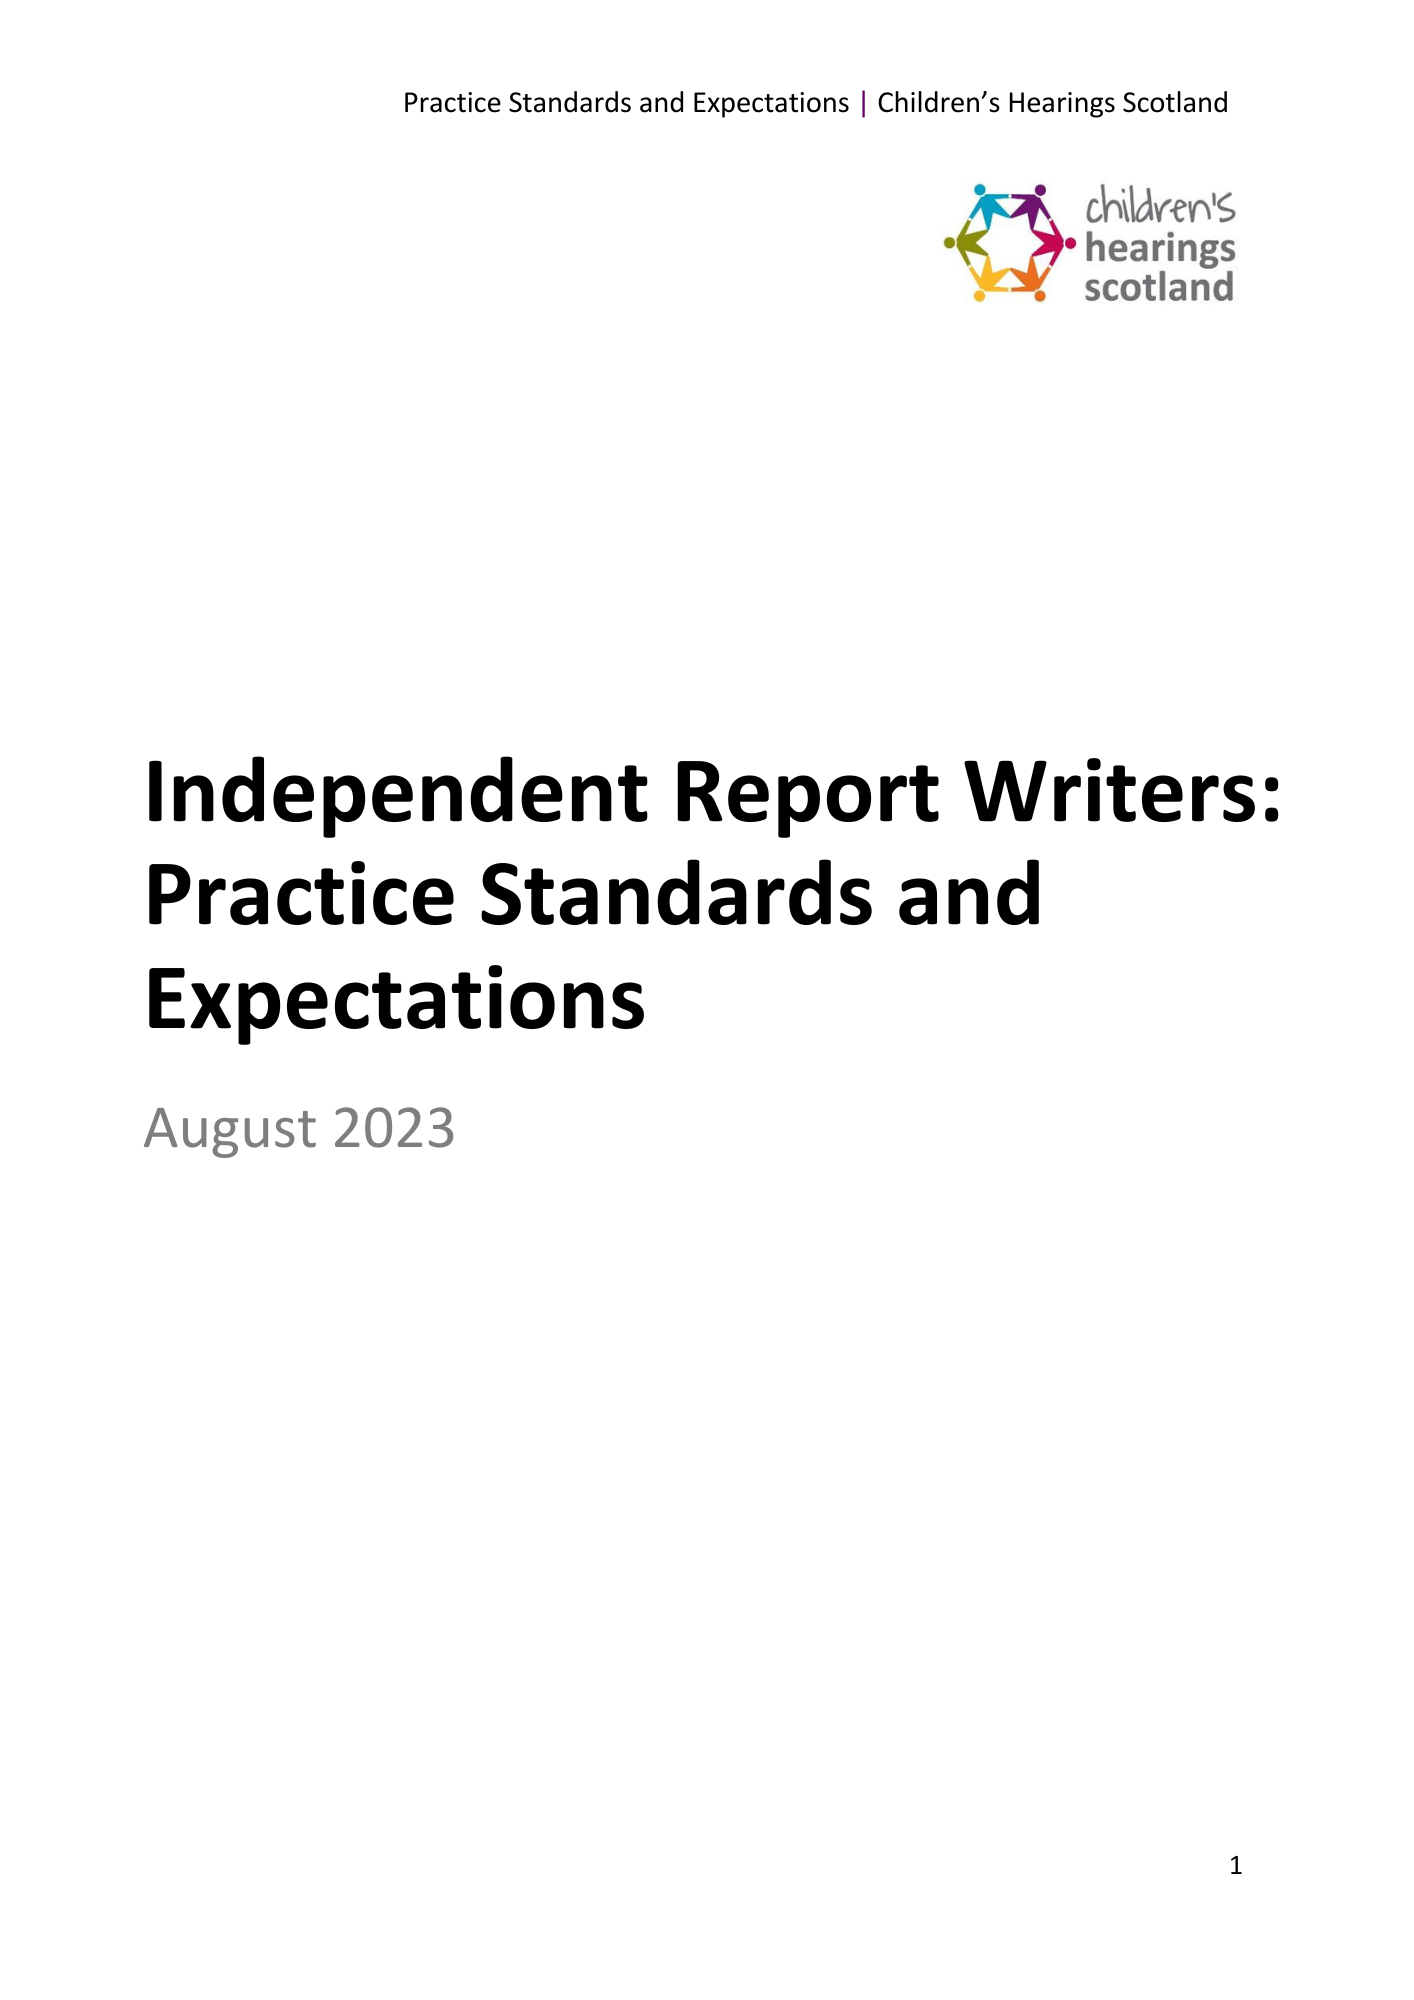 Independent Report Writers: Practice Standards and Expectations